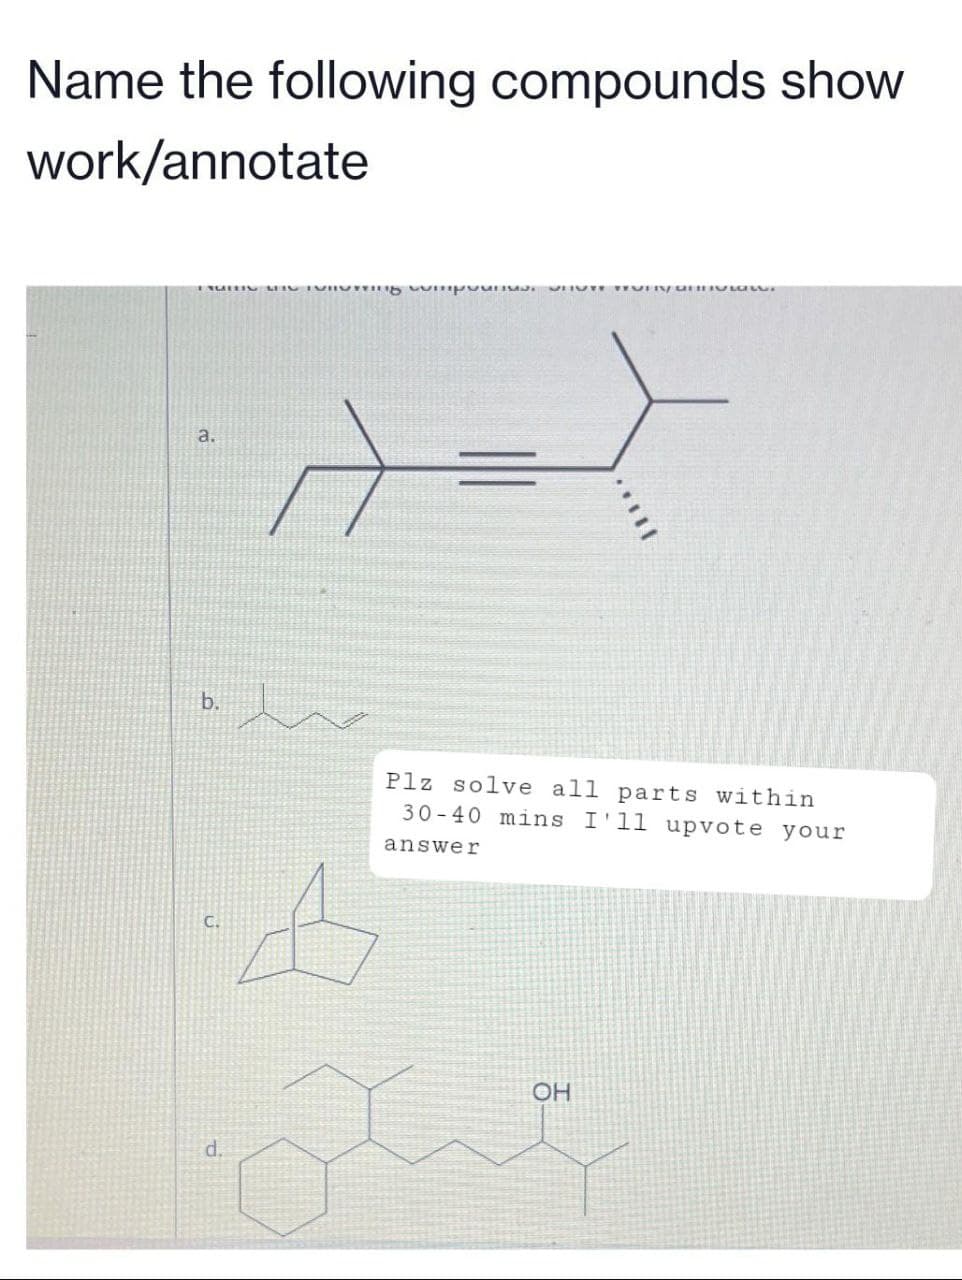 Name the following compounds show
work/annotate
NUTTIG MIG TVRDTing wimpy
HUTE TEORIV GENT
a.
b.
d.
w
A
11.
Plz solve all parts within
30-40 mins I'll upvote your
answer
OH